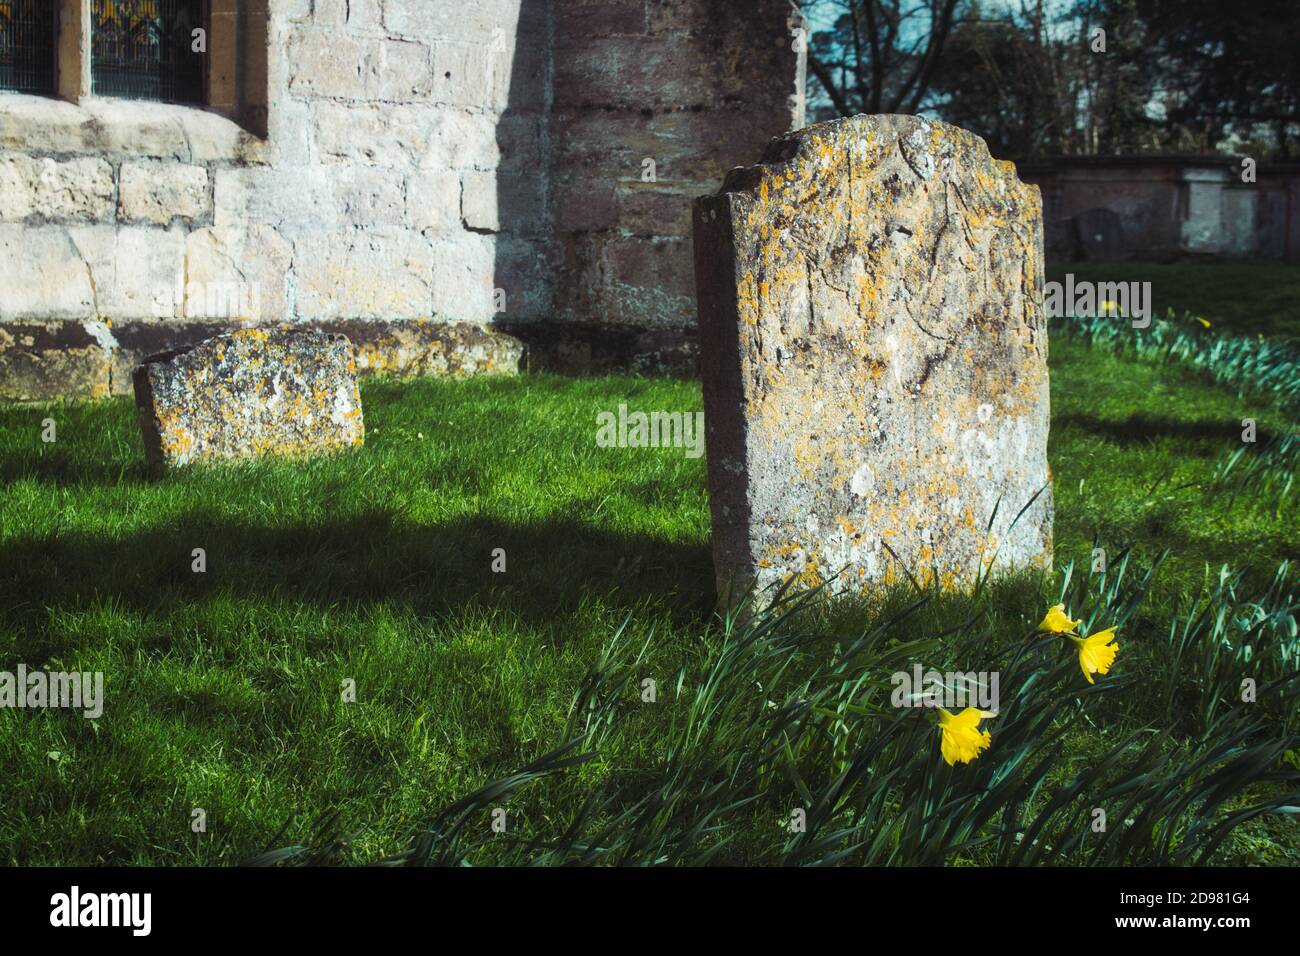 Blank gravestones in a typical churchyard in England Stock Photo